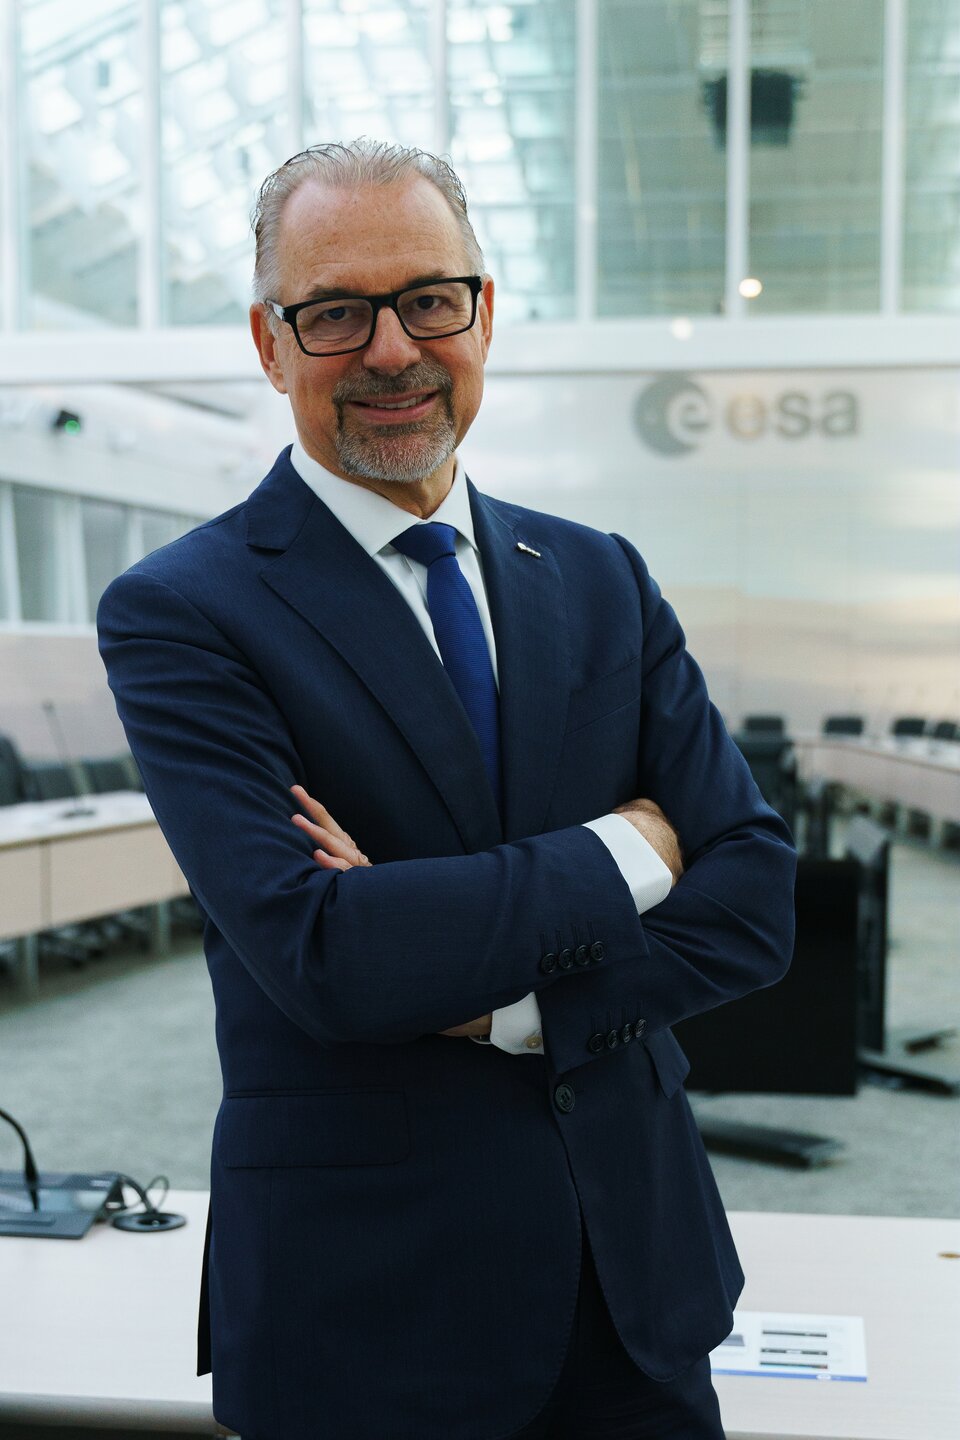 ESA Director General Josef Aschbacher in the council chamber at ESA's headquarters in Paris